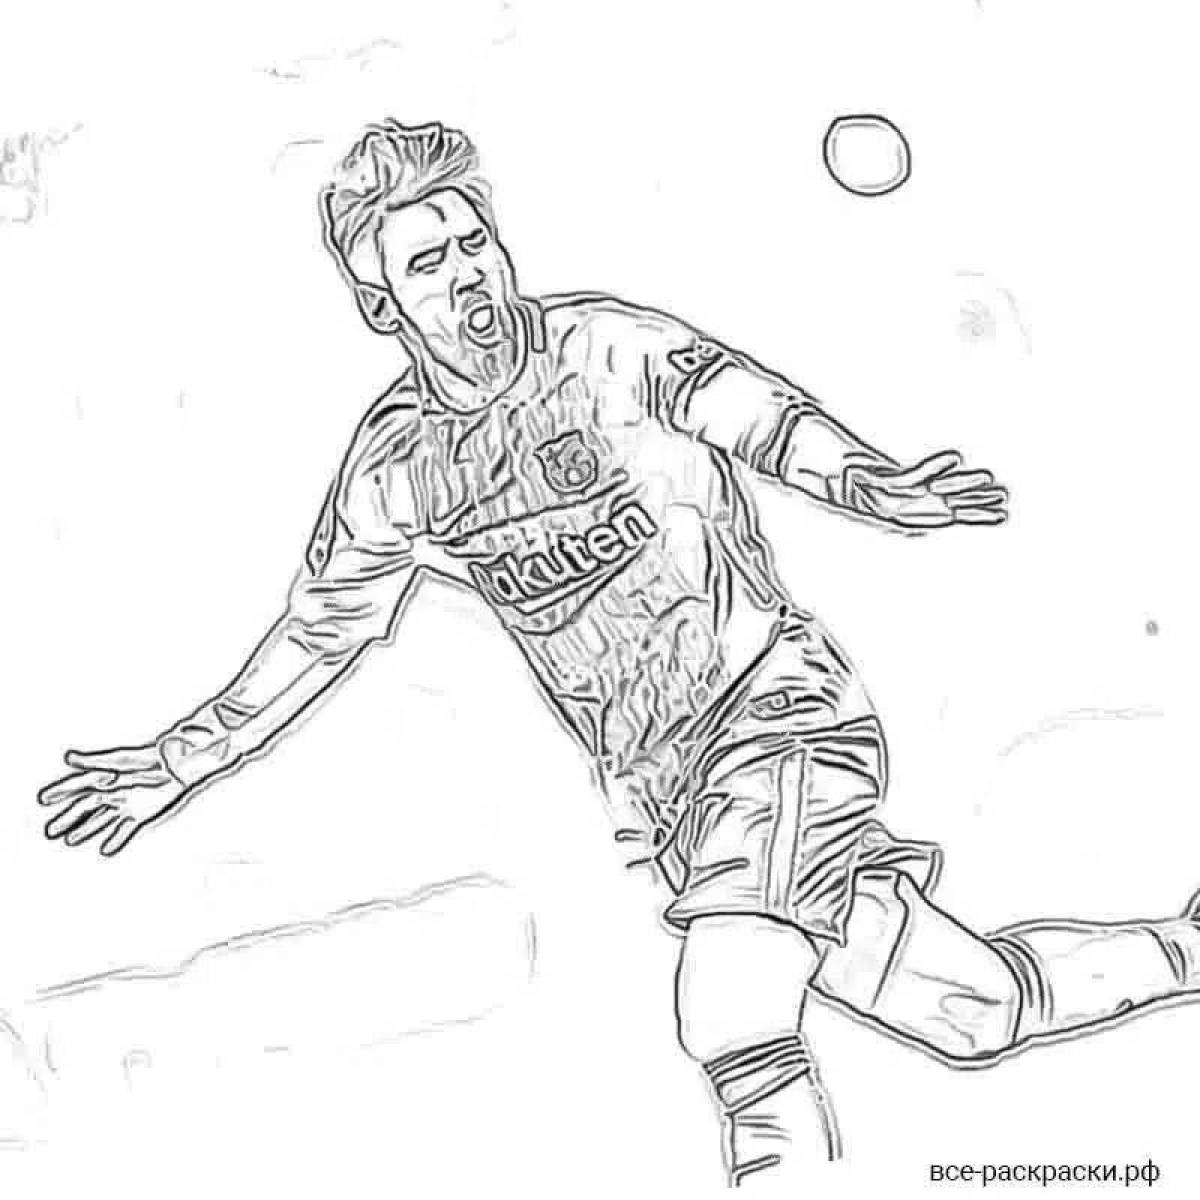 Exquisite soccer player messi coloring book